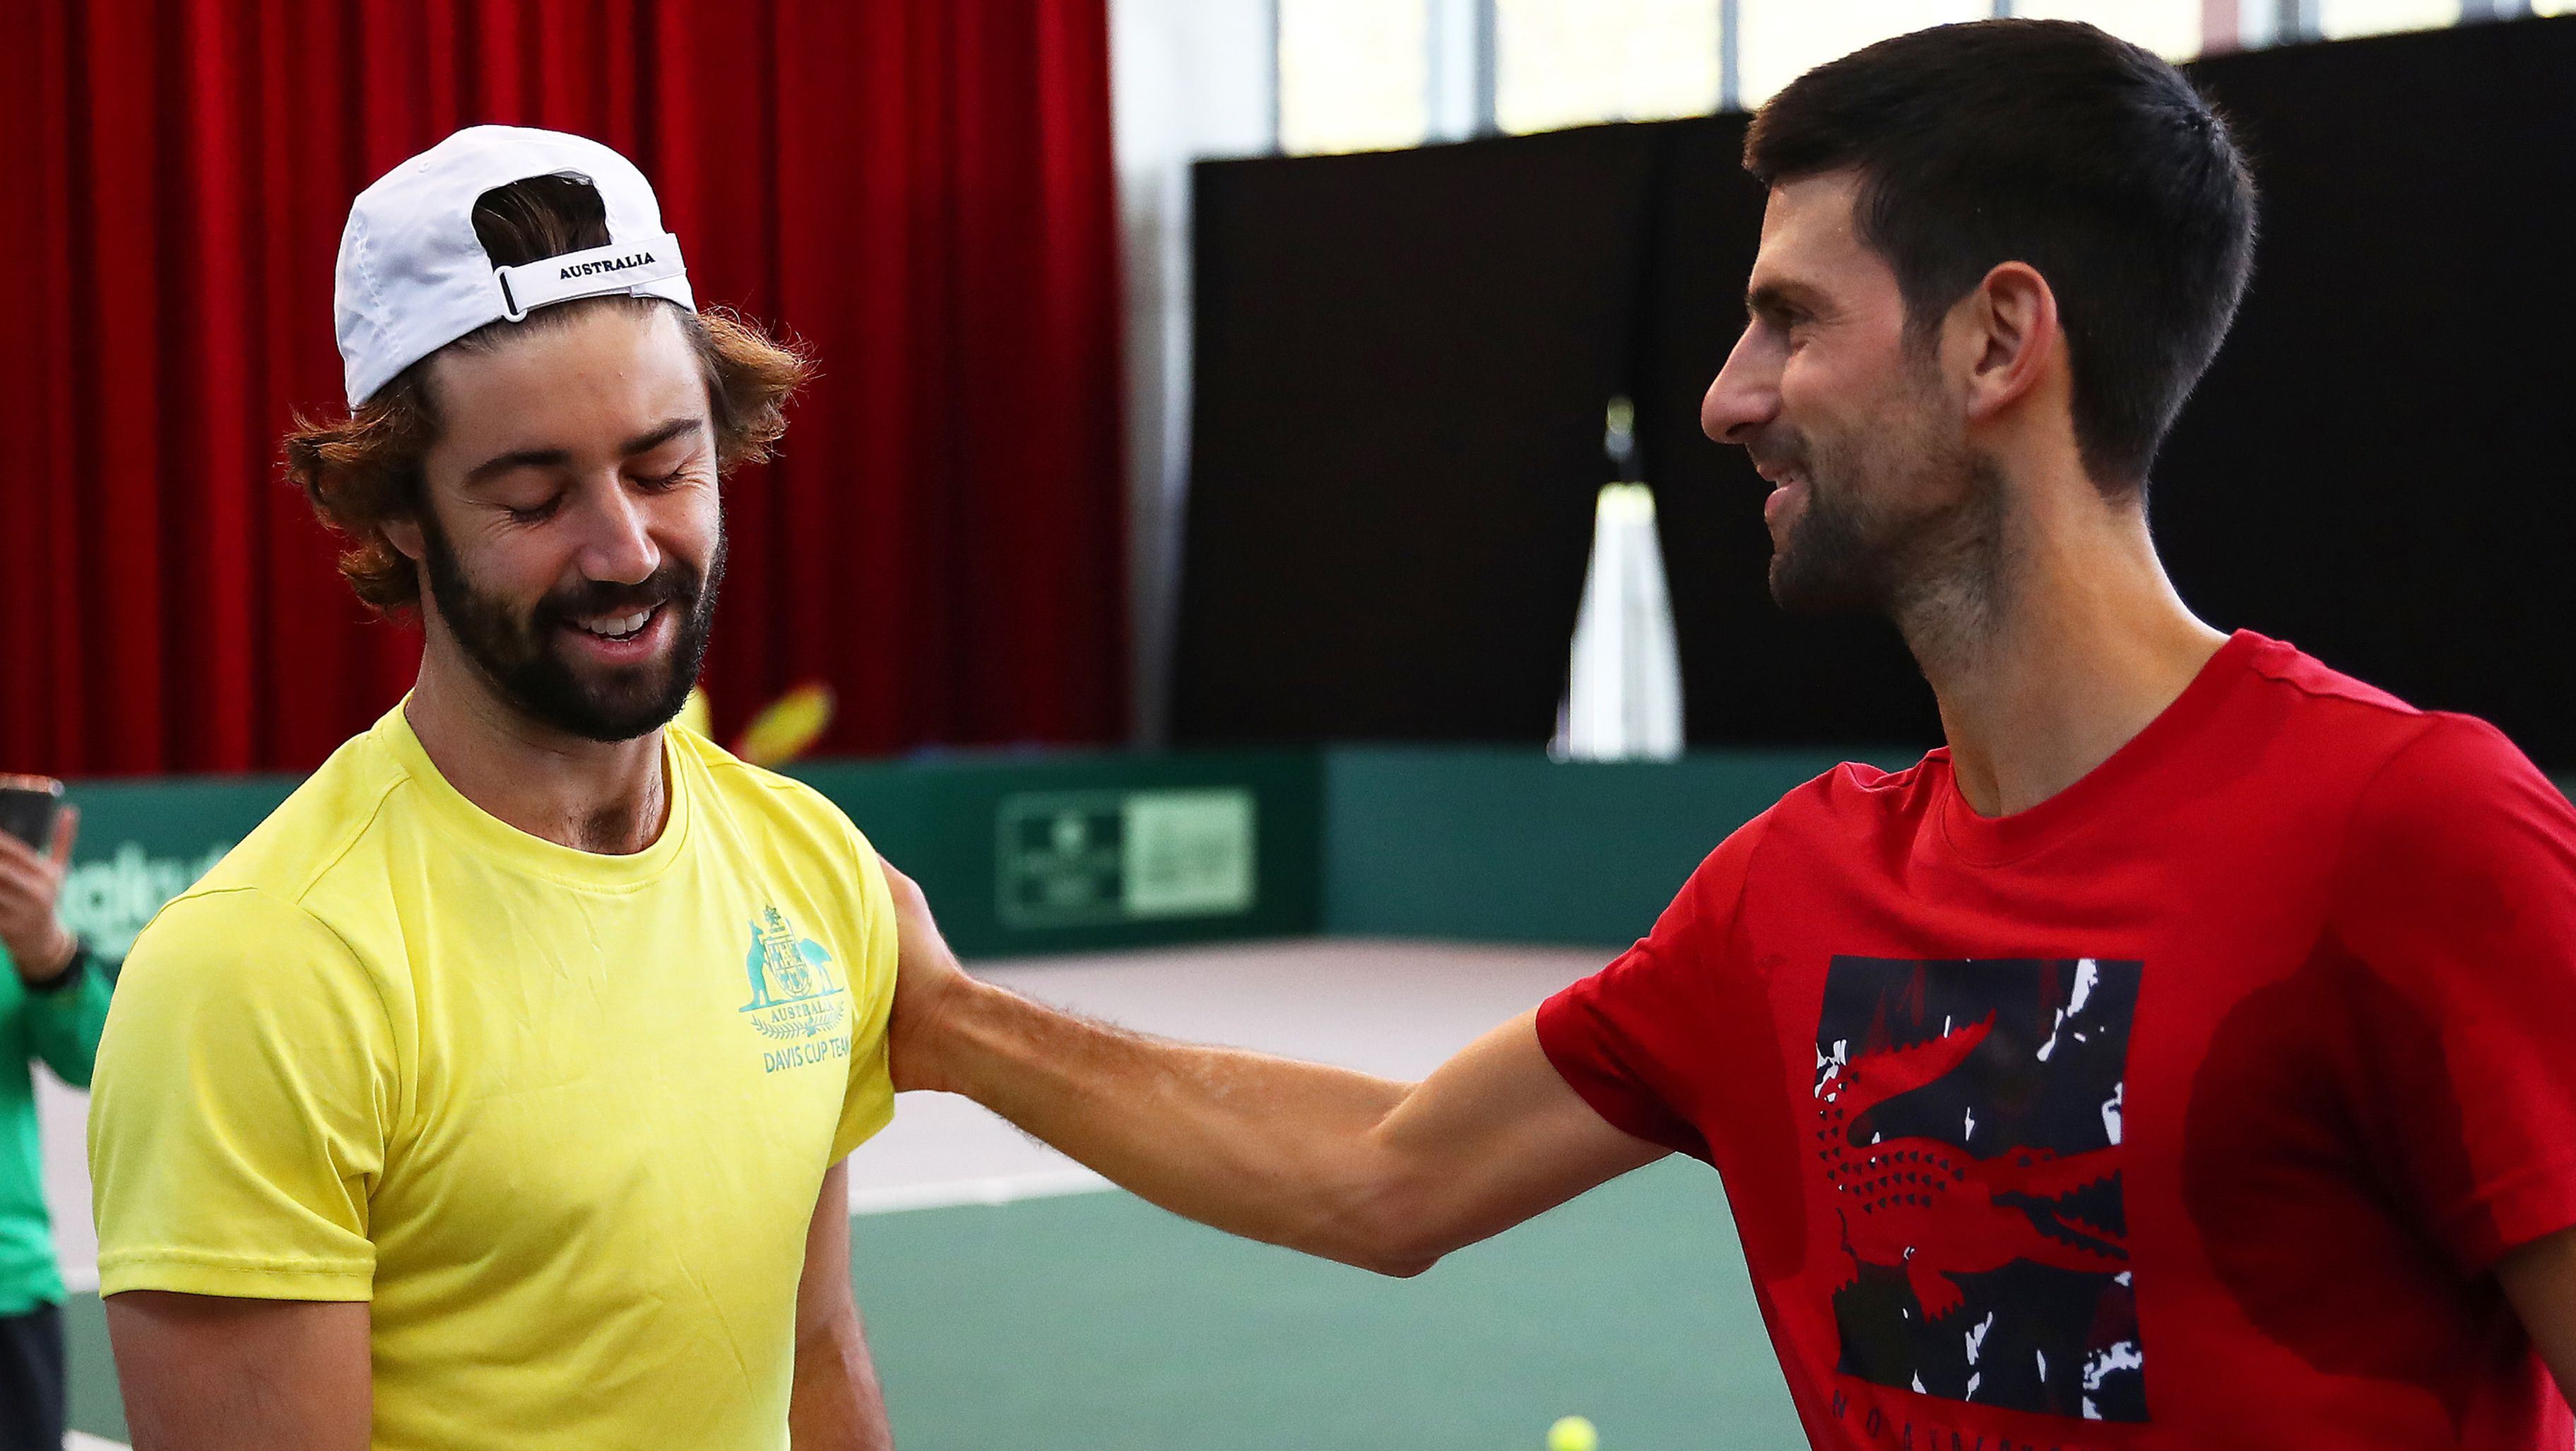 Novak Djokovic and Jordan Thompson after a Davis Cup practice session in 2019 in Madrid.